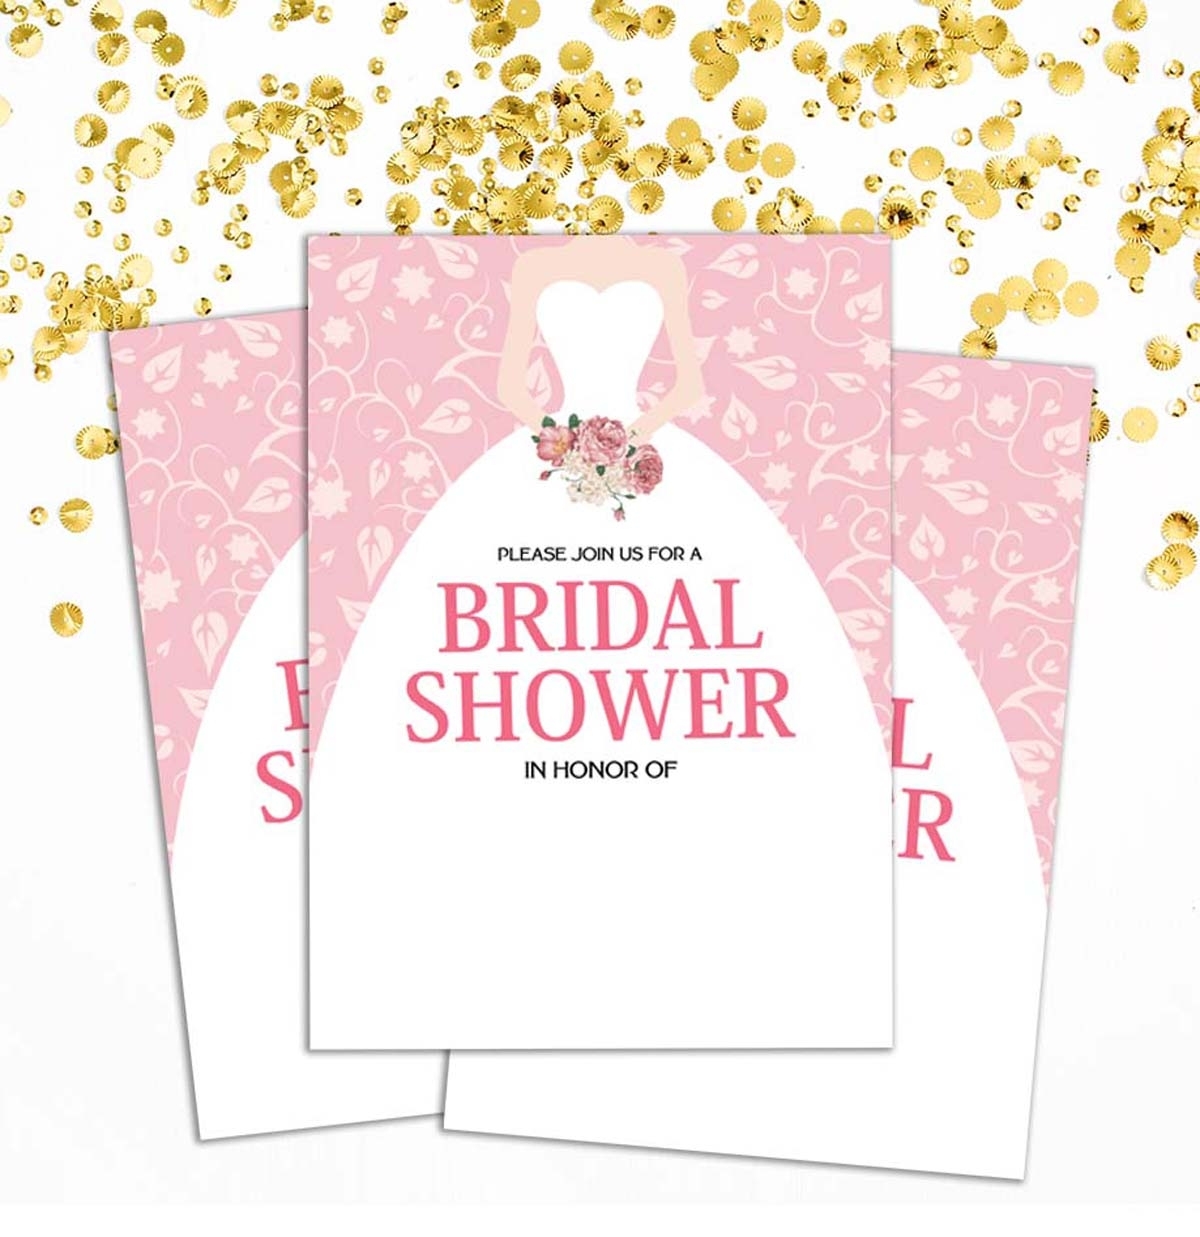 Bridal Shower Invitation Card 28Pcs Write Blank Invites Party Supplies Within Blank Bridal Shower Invitations Templates